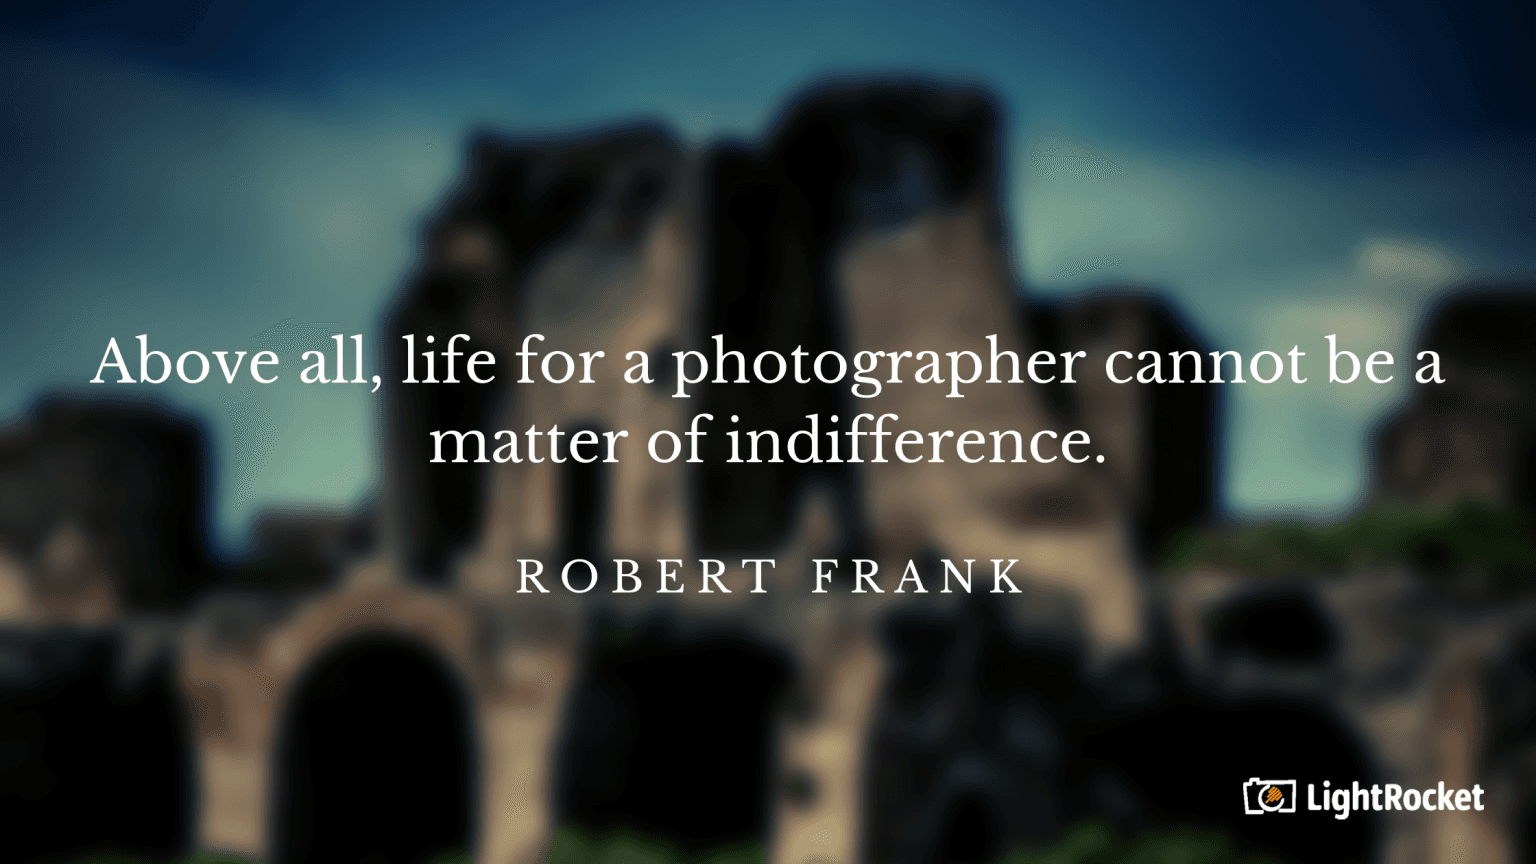 “Above all, life for a photographer cannot be a matter of indifference.” – Robert Frank